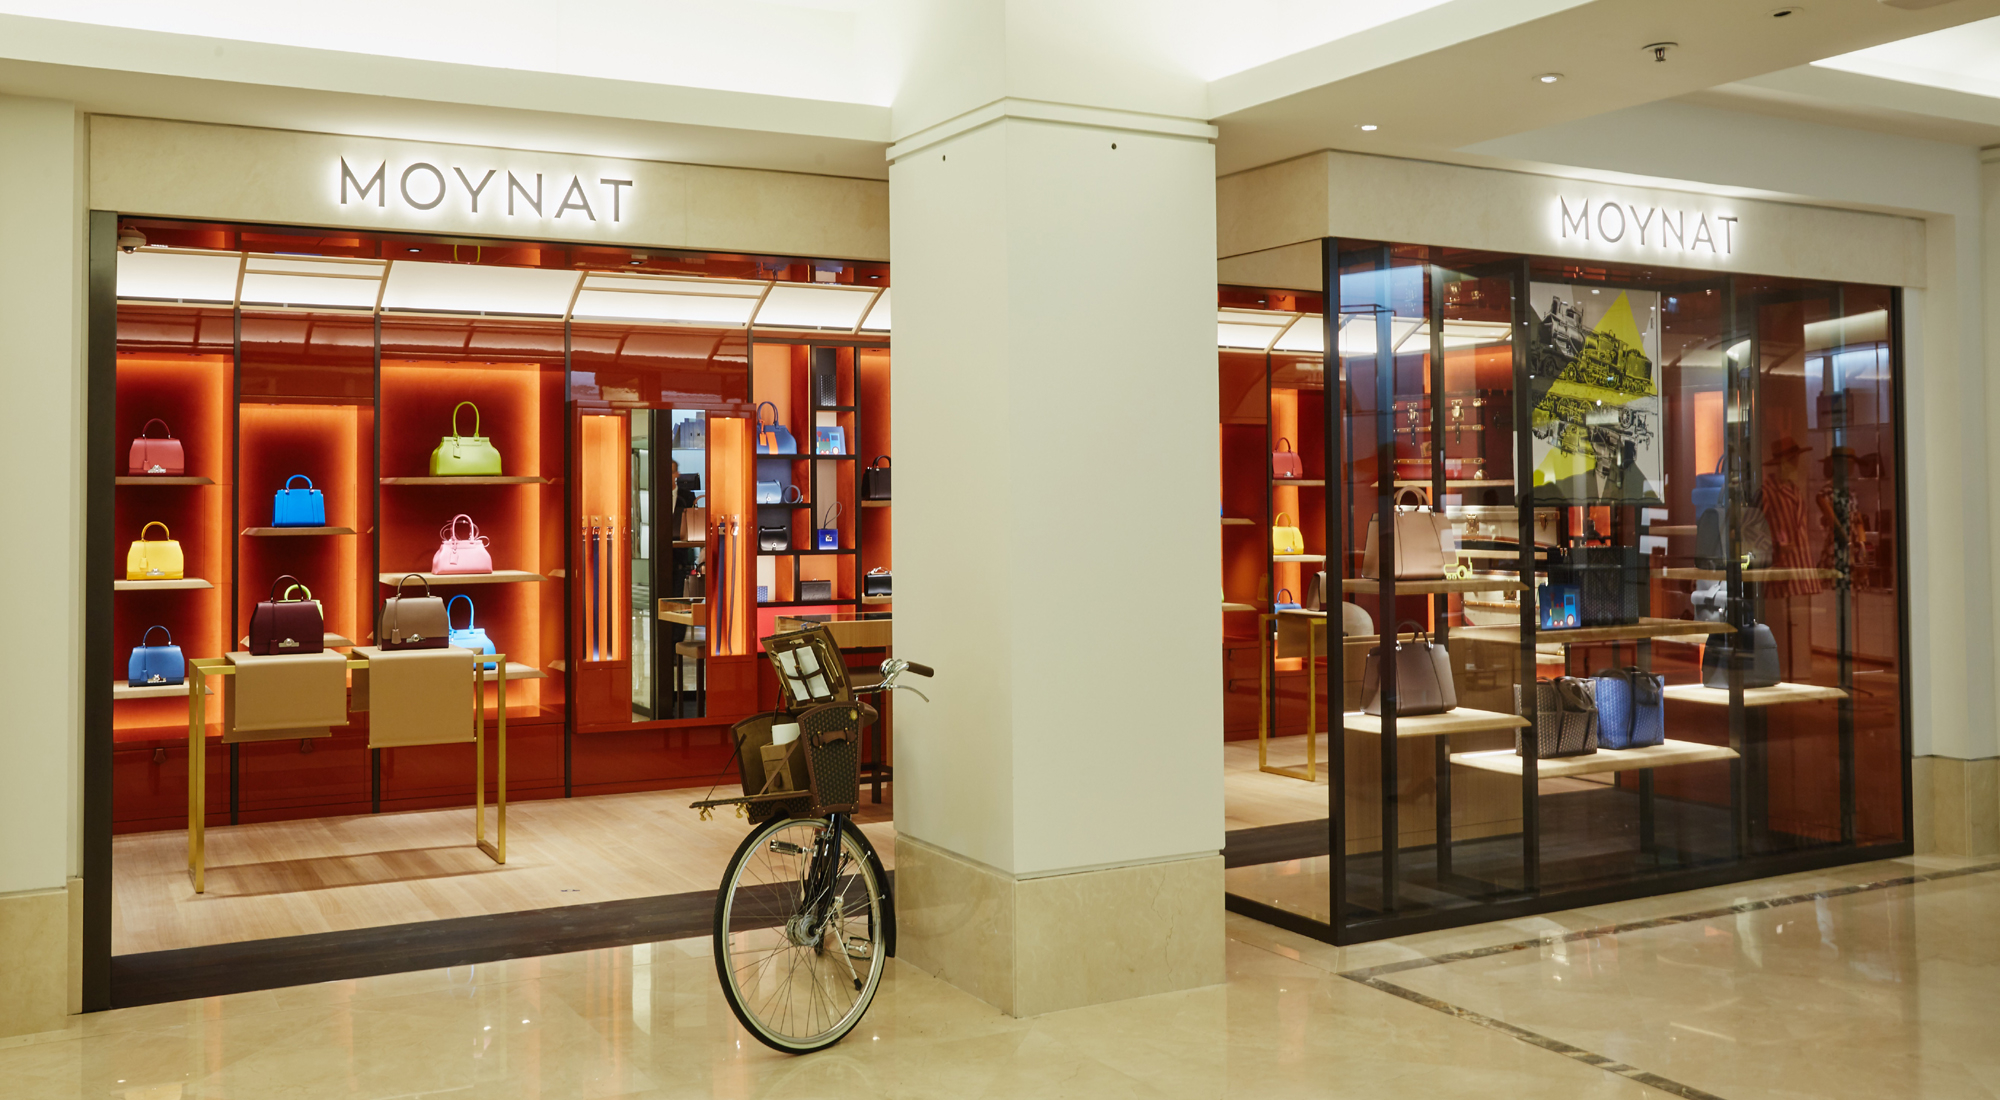 Moynat's new CEO snatched from Sephora